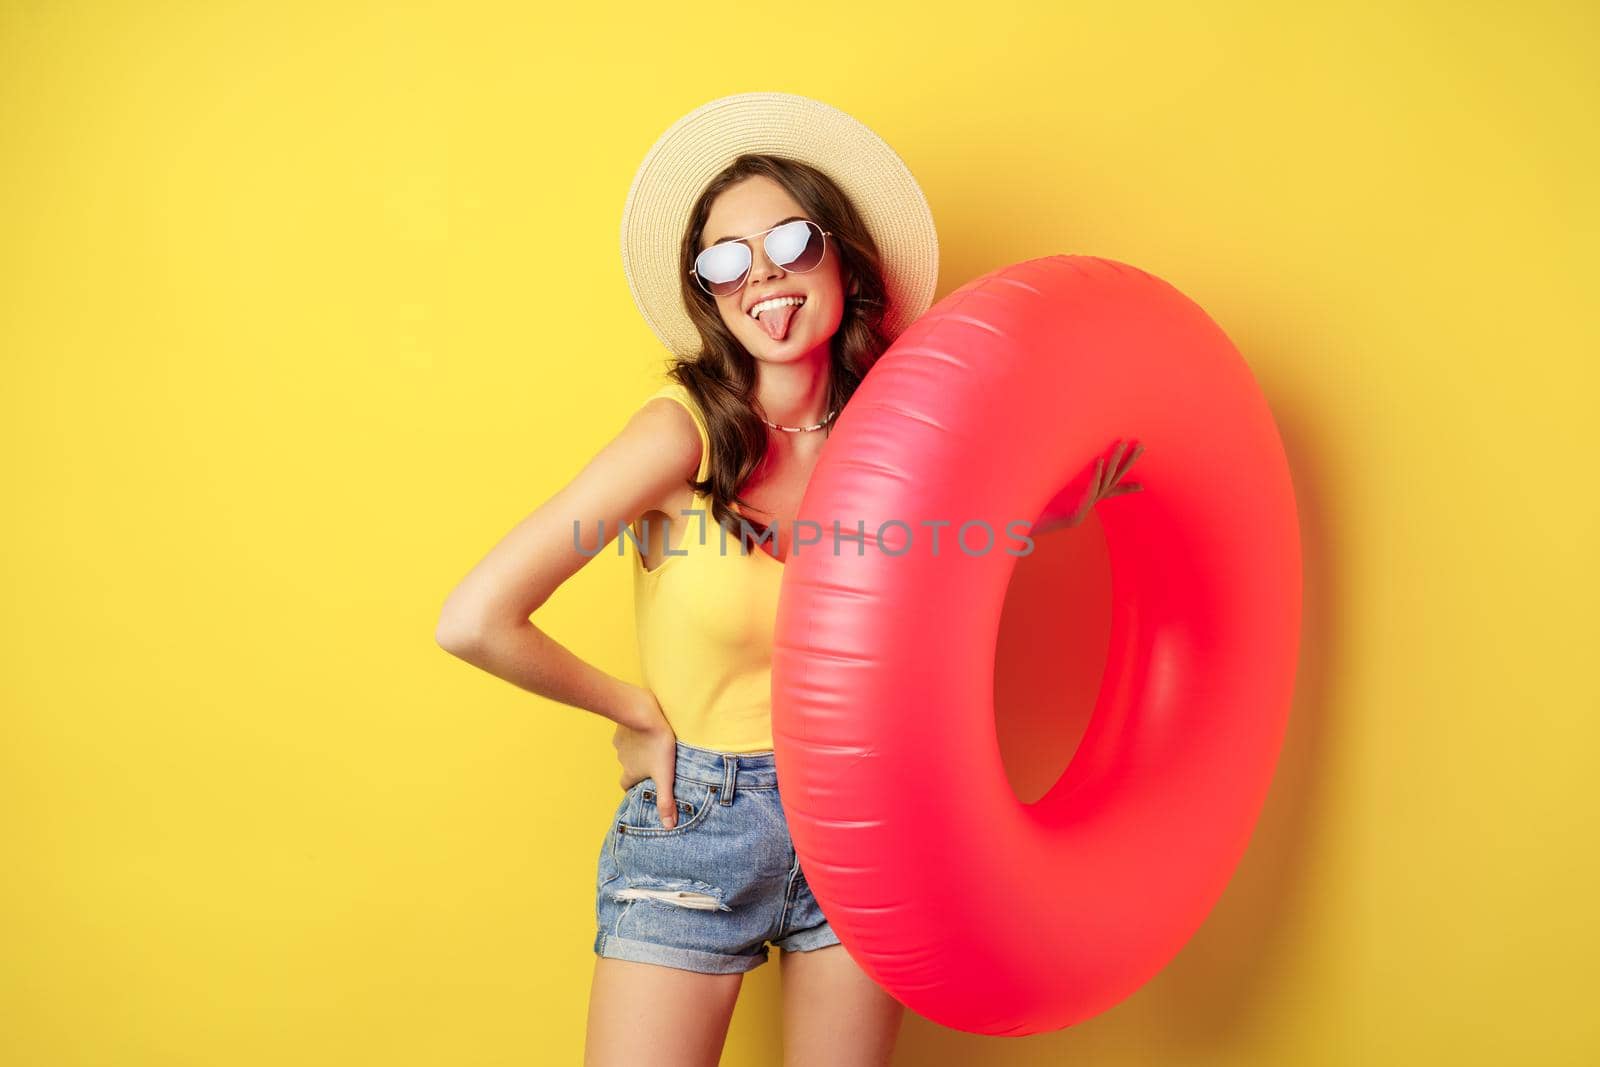 Stylish beach girl with swimming ring, laughing and smiling on summer vacation, sea trip, standing happy against yellow background.